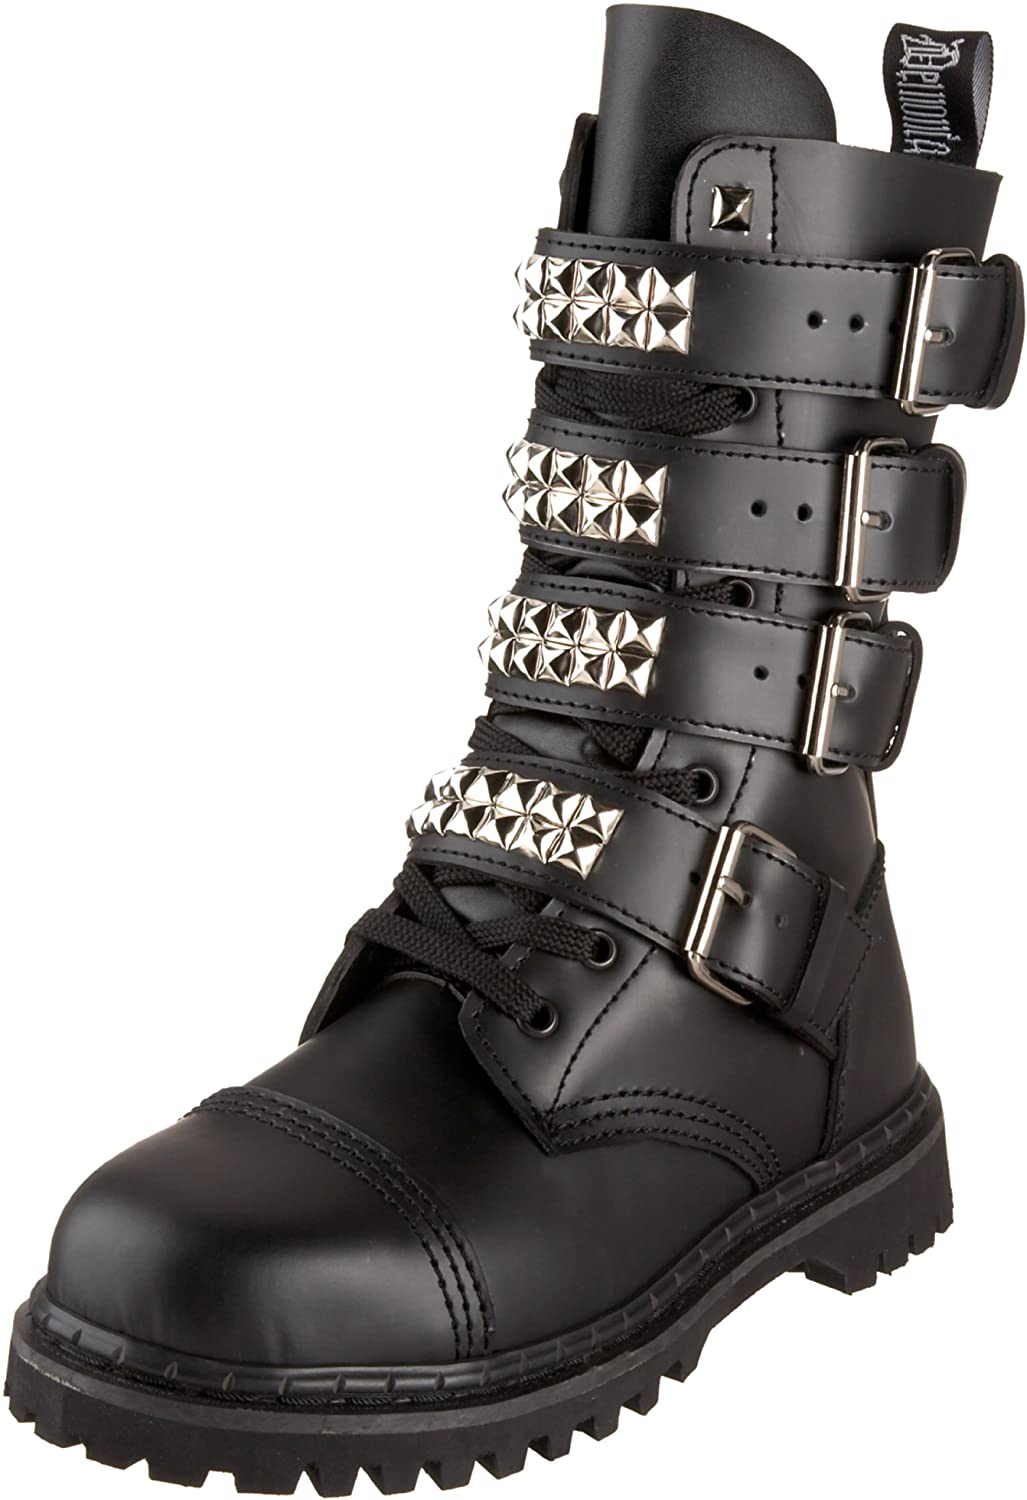 outer side view of real black leather mid-calf boot, full front lace-up, no zipper, features 4 silver pyramid studded adjustable straps that cover laces